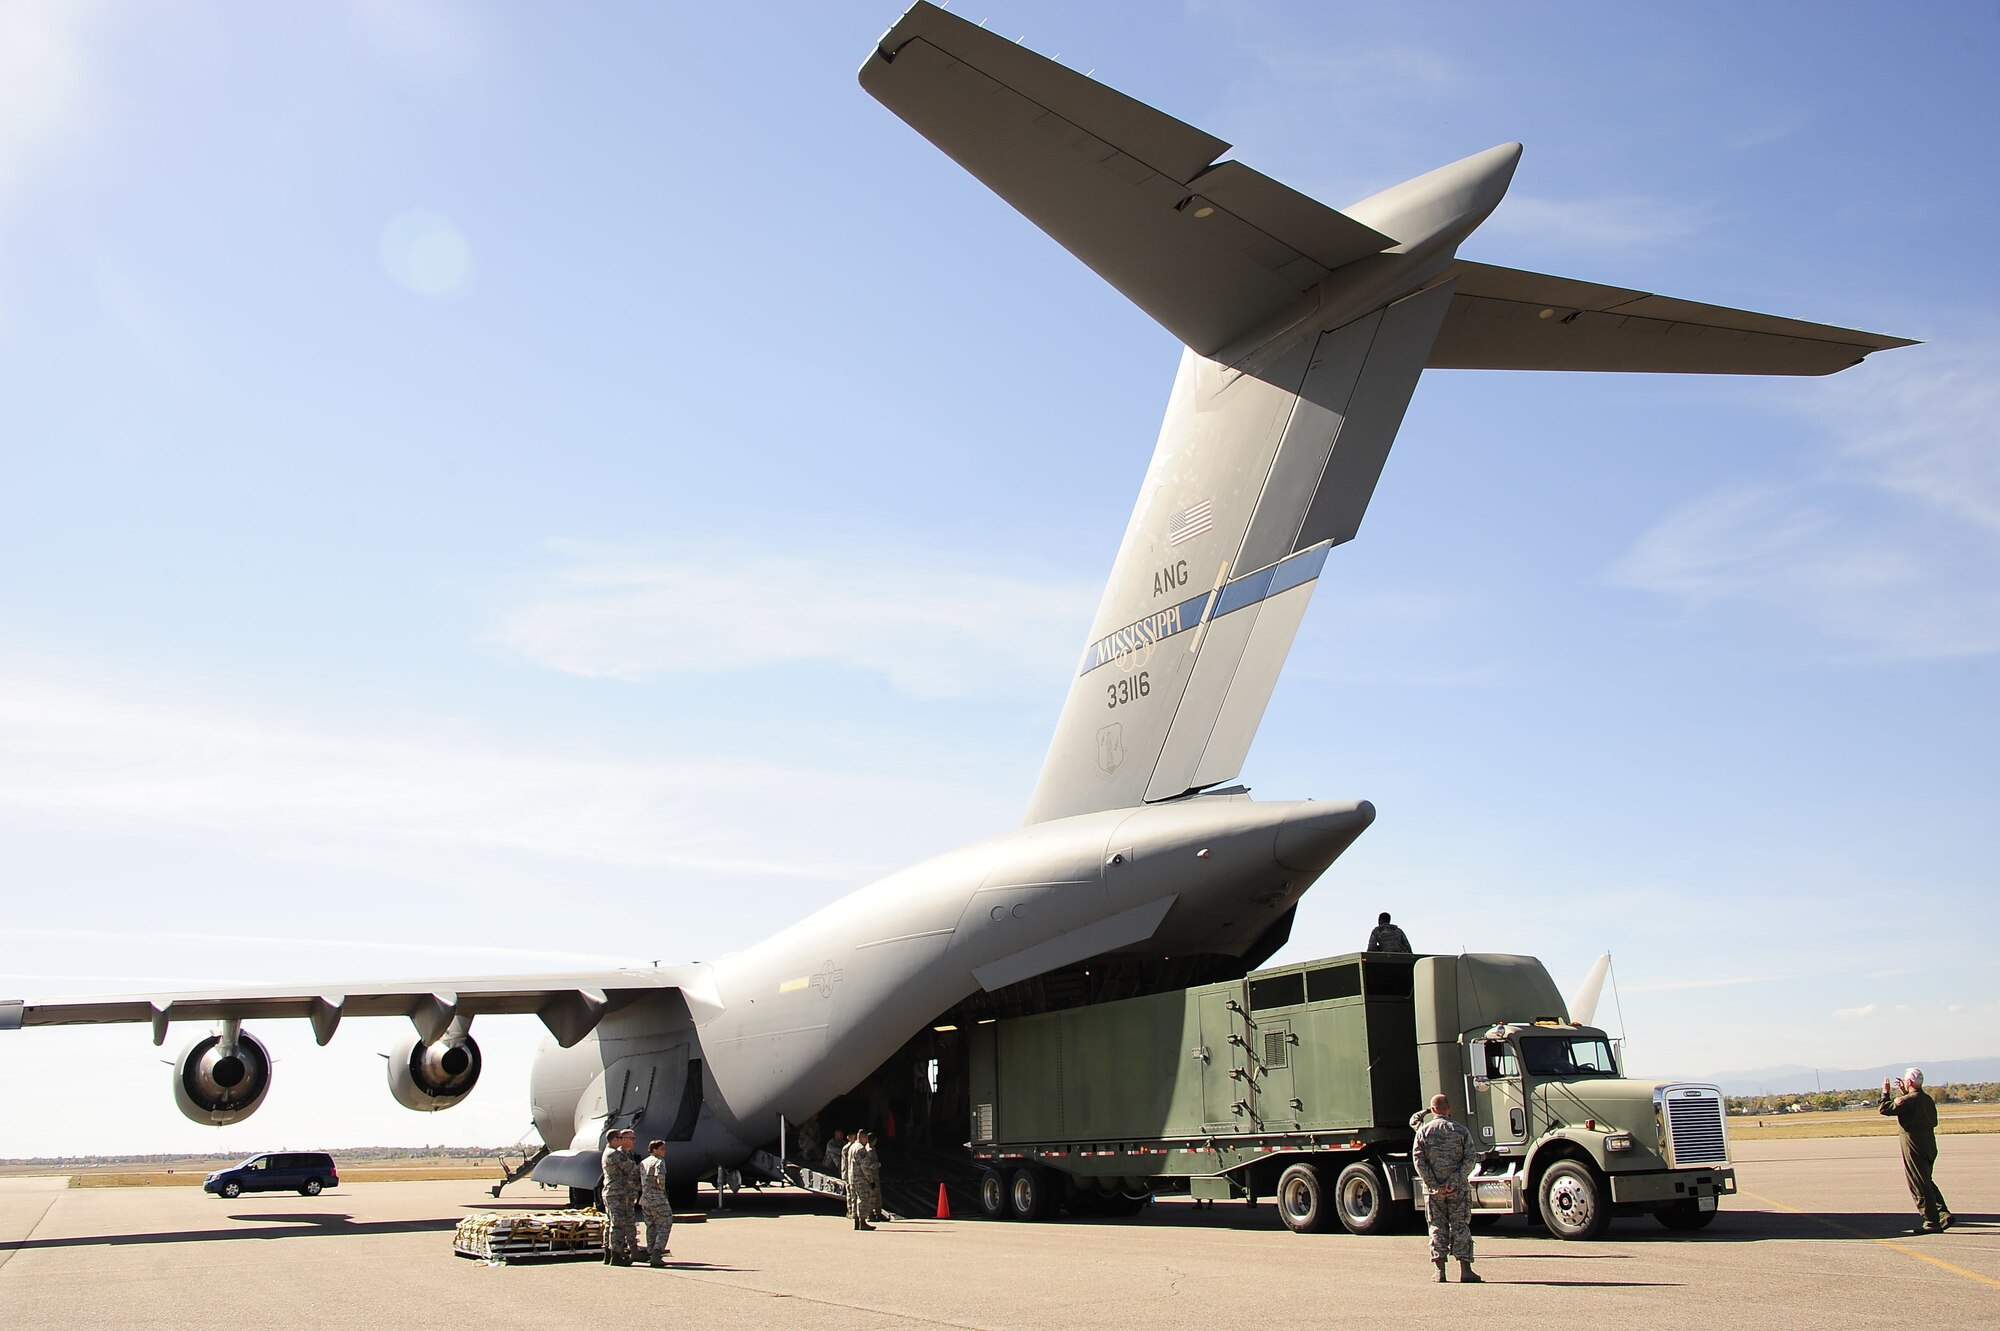 Colorado Air National Guard Airmen from the 233d Space Group, Greeley Air National Guard Station, load a Mission Vehicle 118 onto a C-17 Globemaster III at Buckley Air Force Base, Colo., Oct. 17, 2015. This exercise is part of the 140th Wing’s four-day wartime readiness inspection, which is an implementation of the new Air Force Inspection System, and will assess the wing's ability to perform their combat missions. (U.S. Air National Guard photo by Tech. Sgt. Nicole Manzanares)